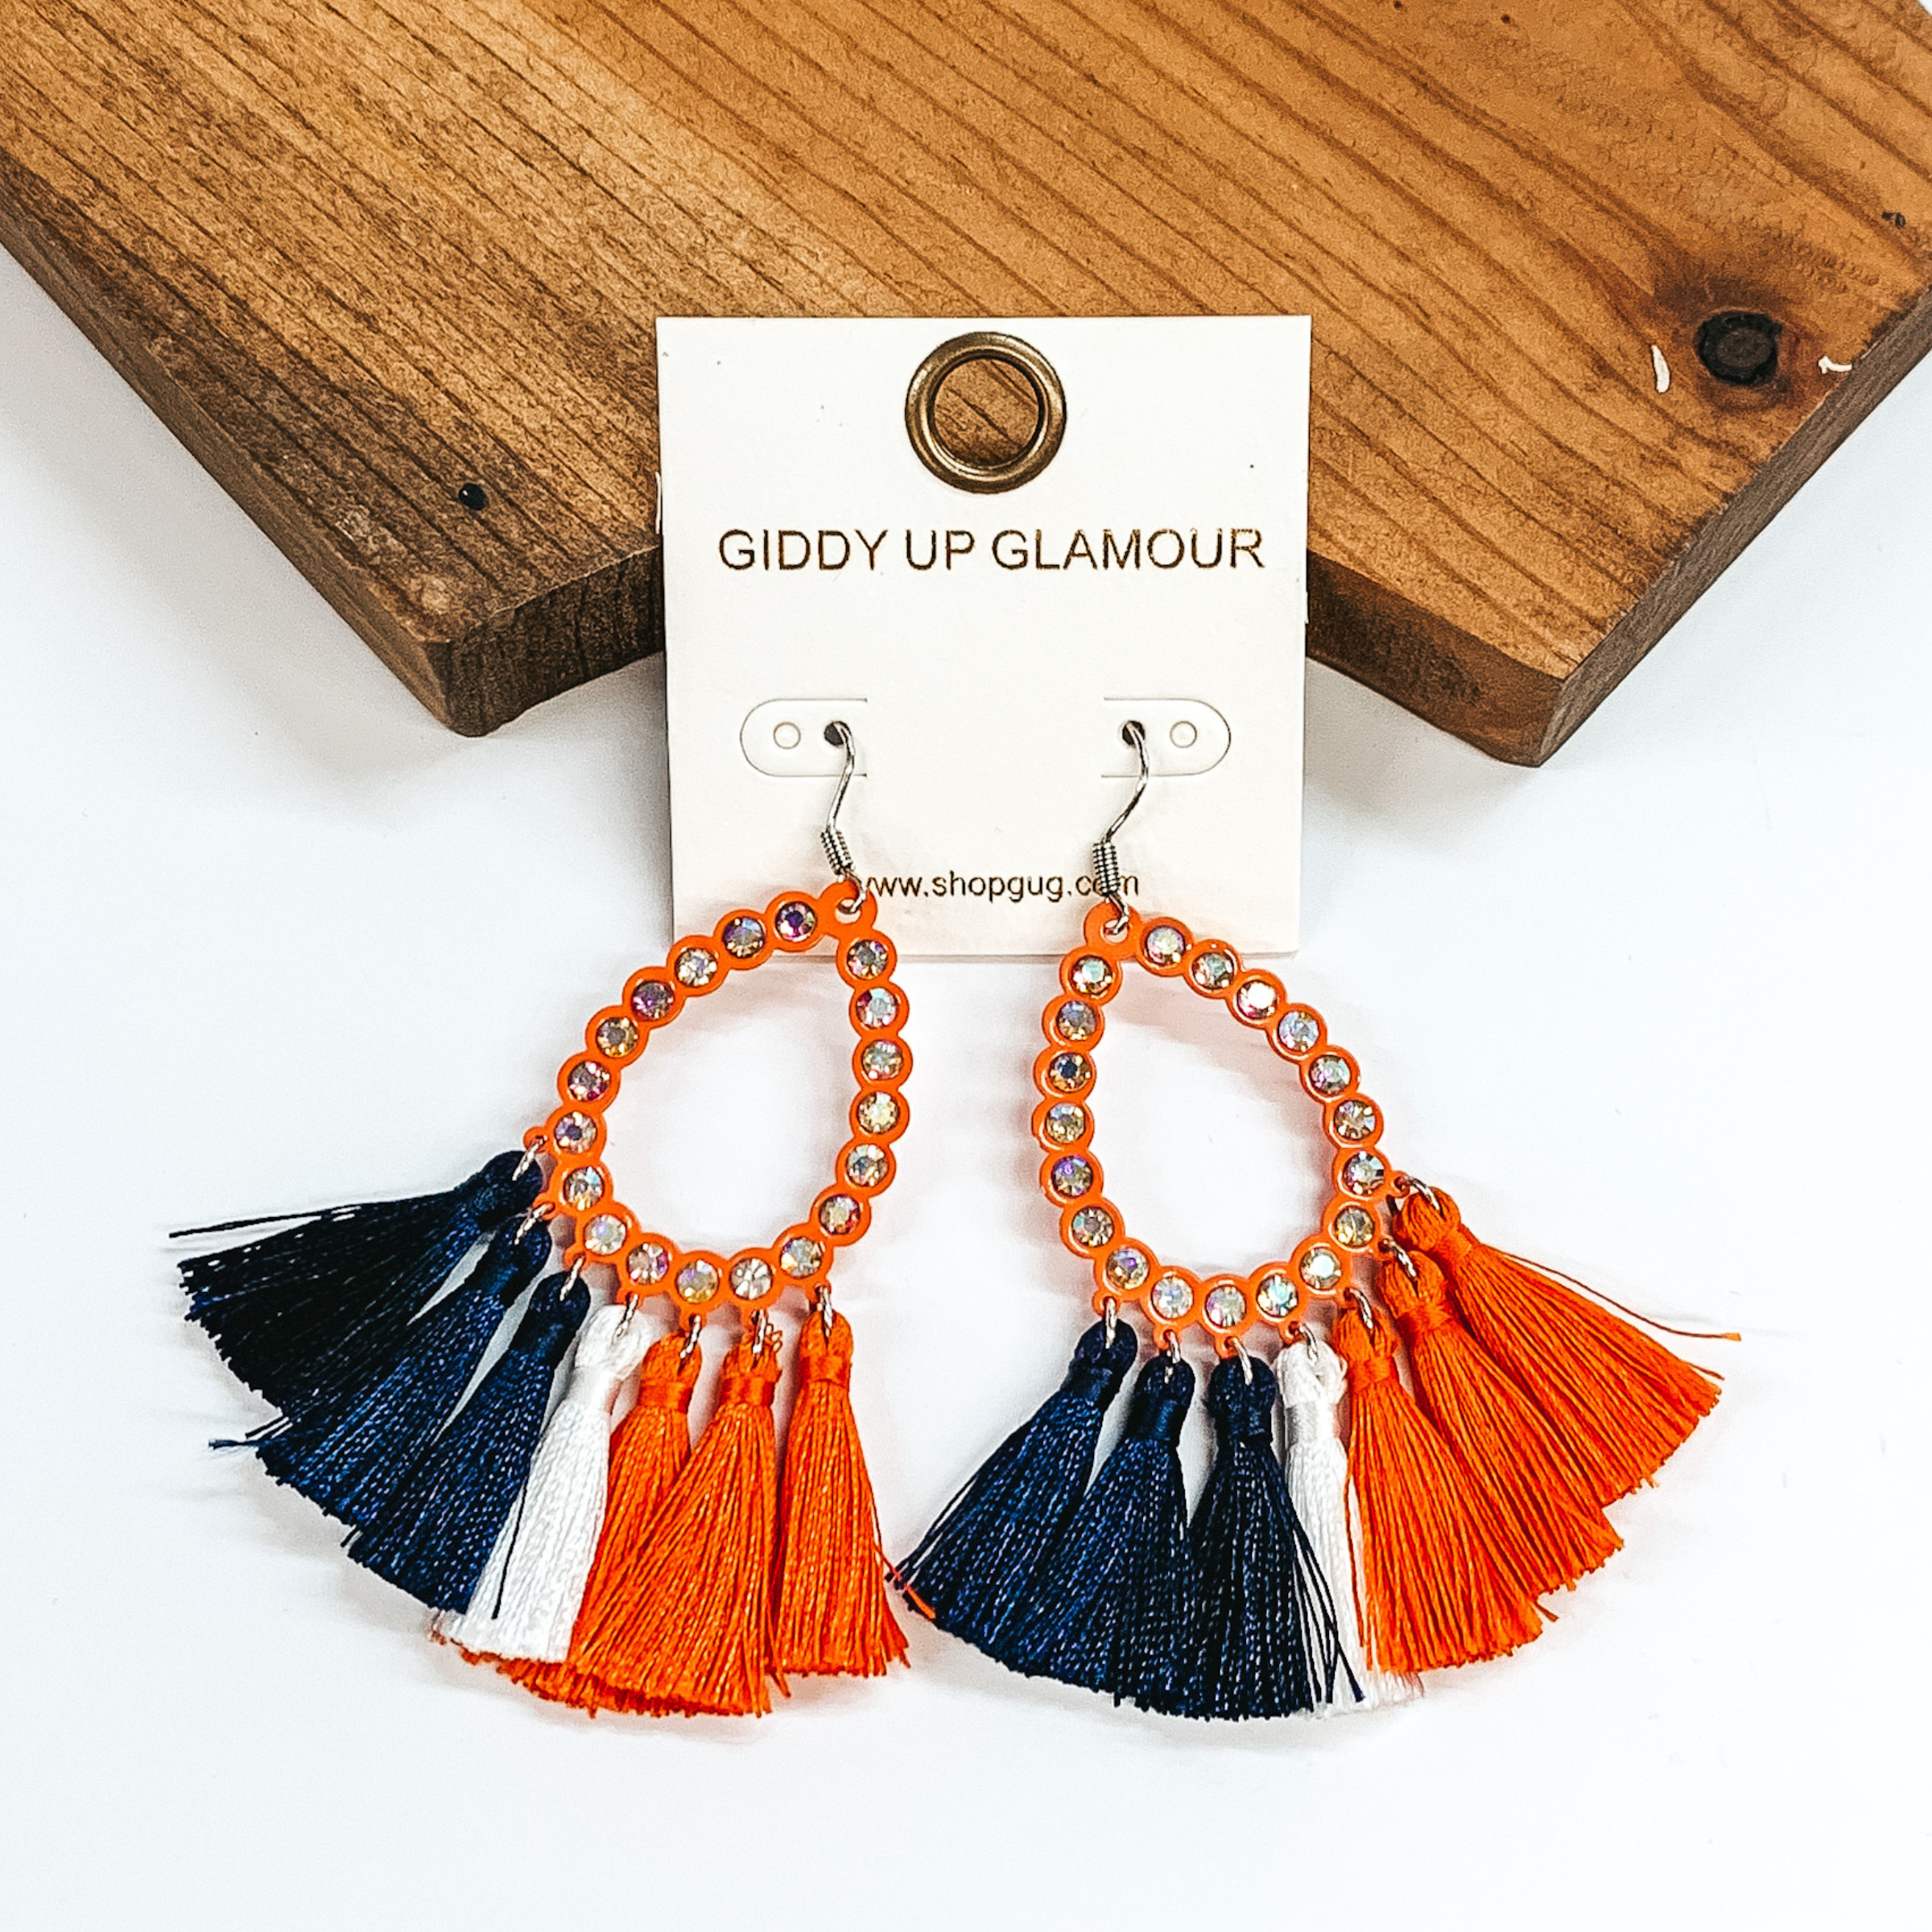 Pictured are a pair of silver fish hook earrings with an open, orange teardrop pendant with ab crystals. These earrings also include navy, white, and orange tassels at the bottom. These earrings are pictured in front of a brown block on a white background. 